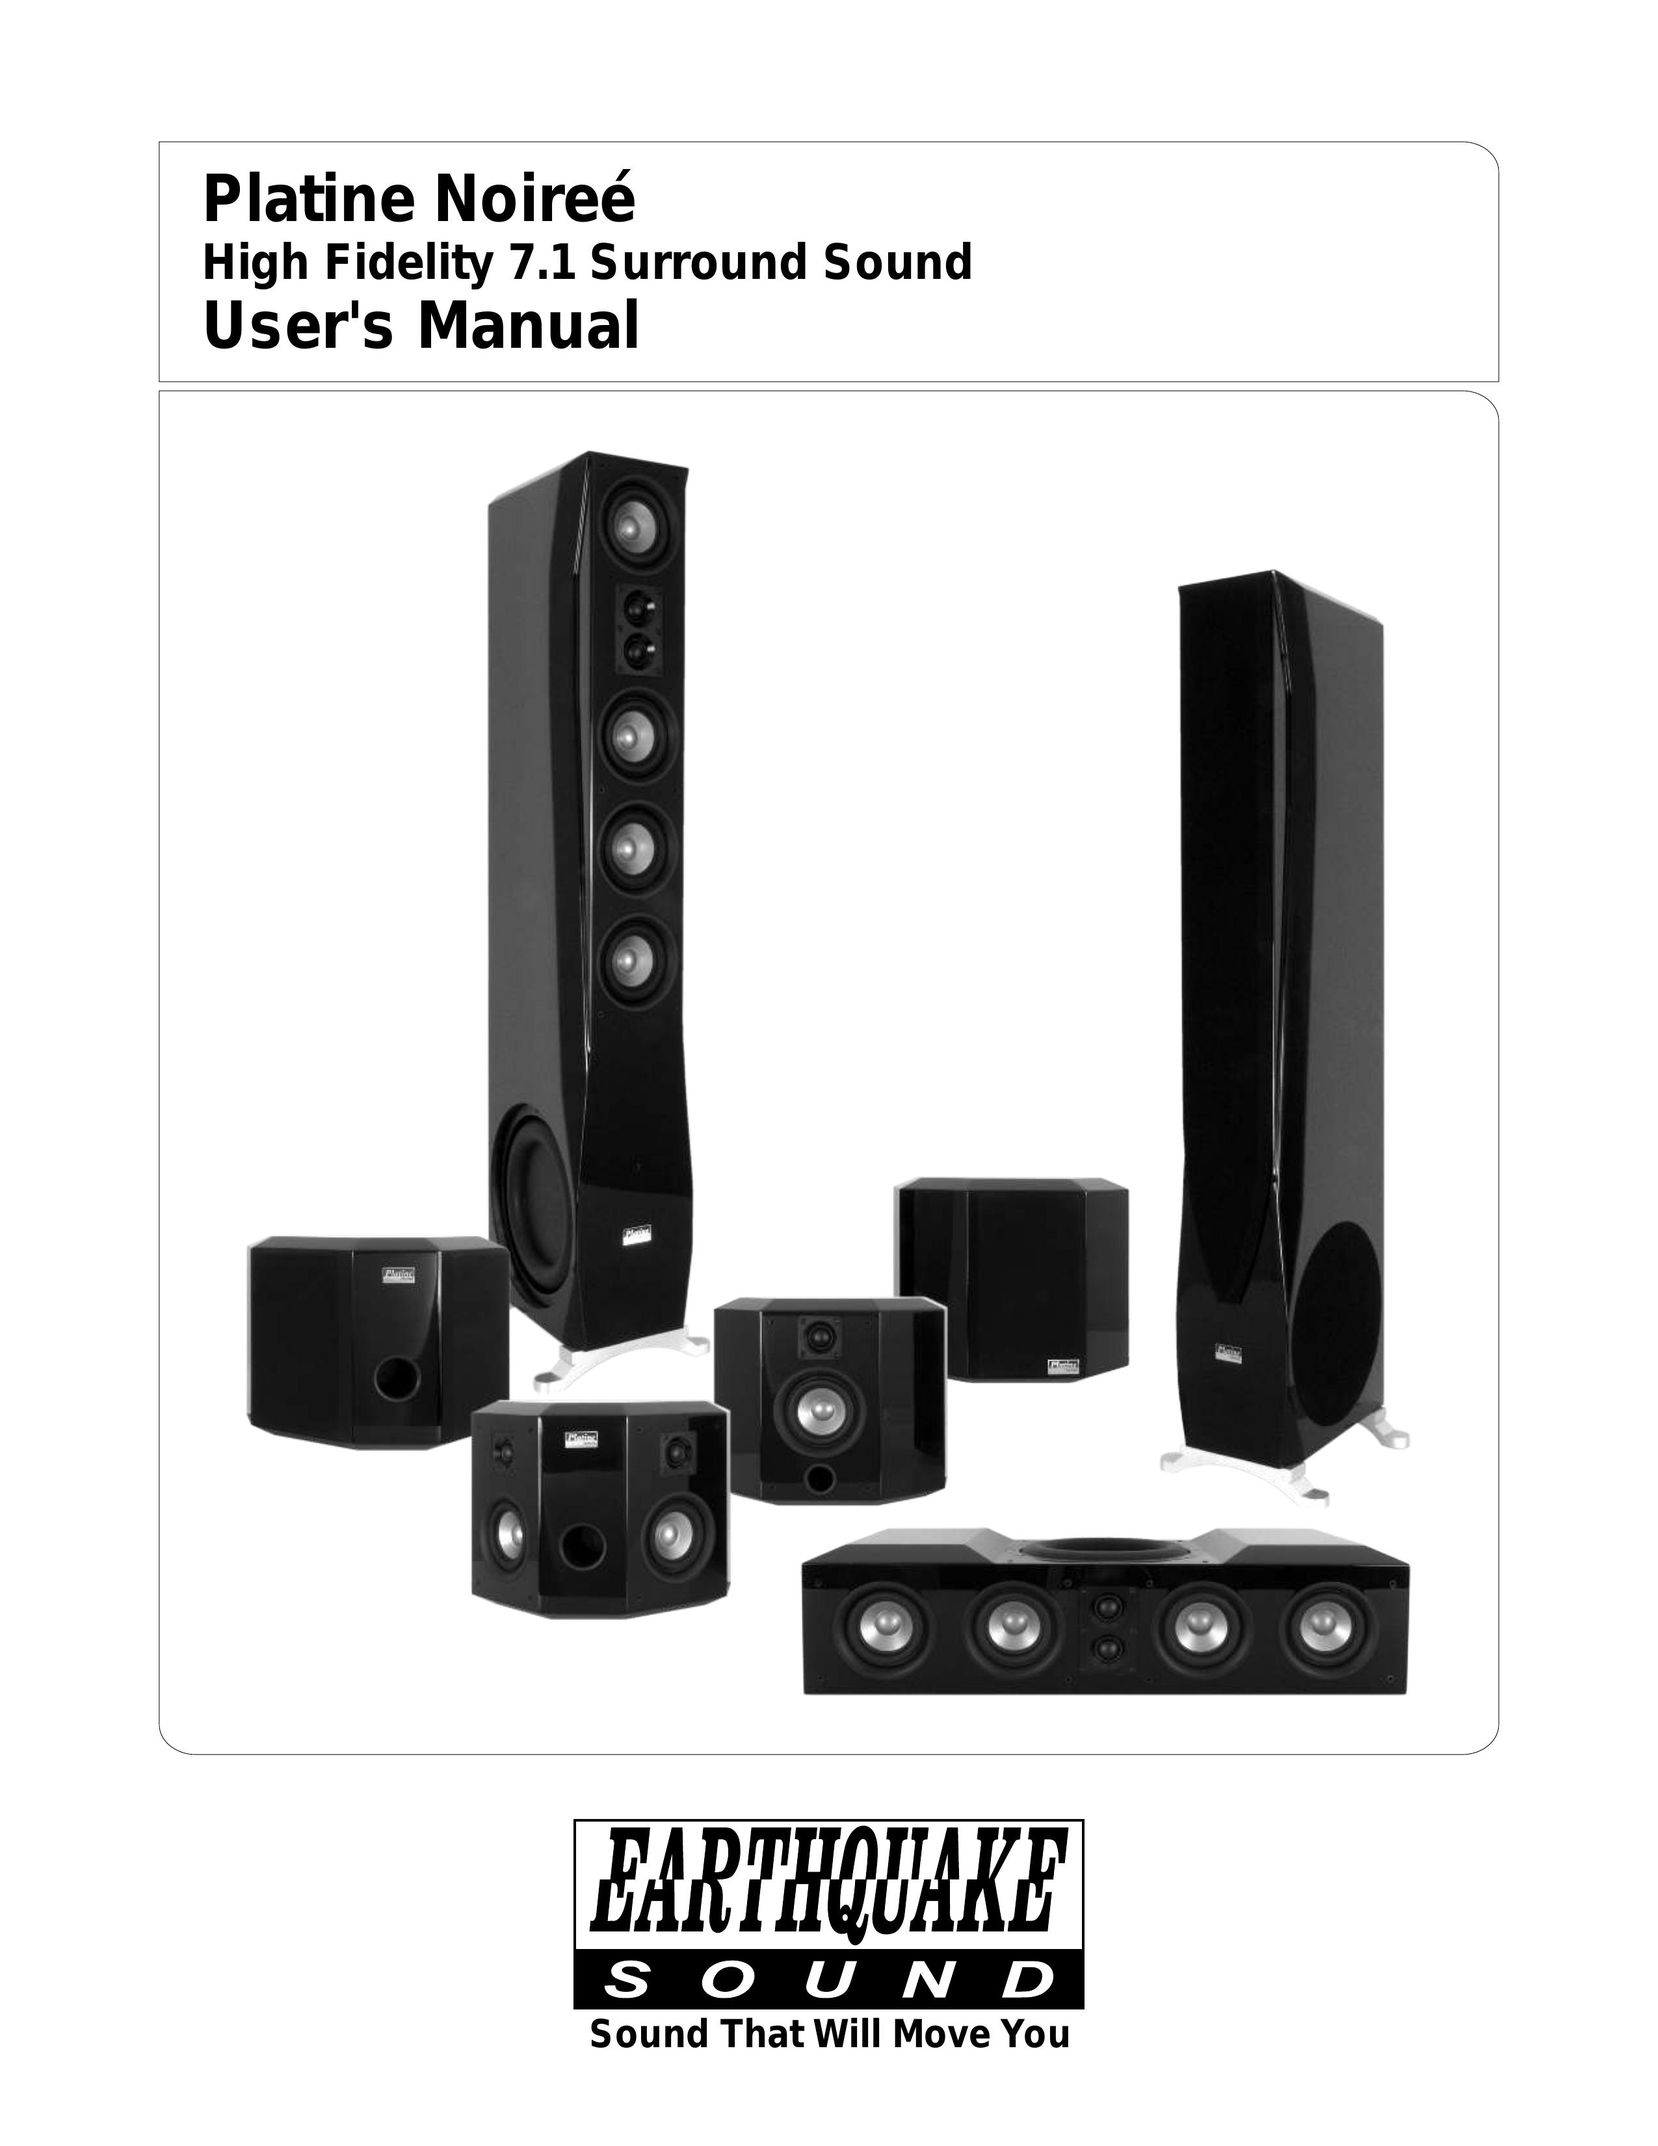 Earthquake Sound PN-4521 Home Theater System User Manual